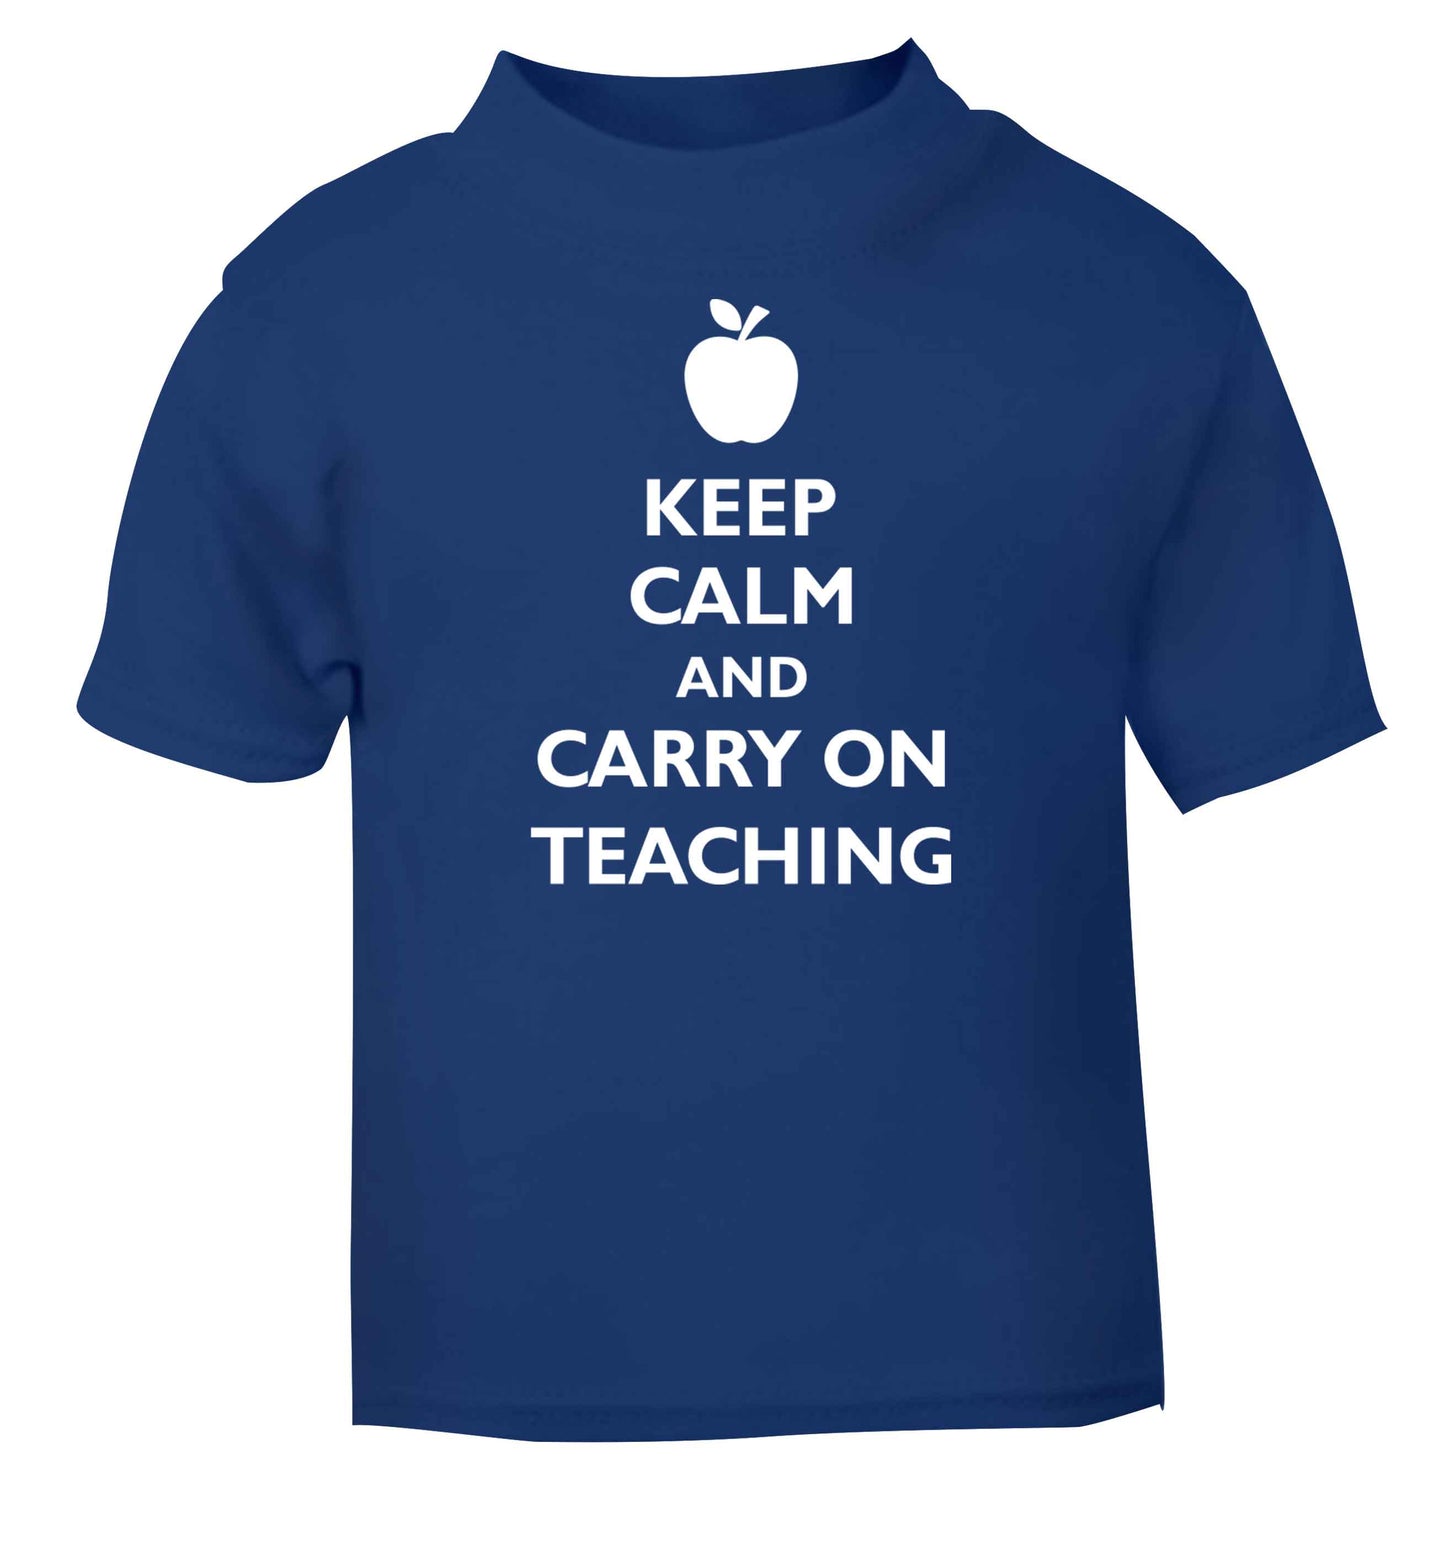 Keep calm and carry on teaching blue baby toddler Tshirt 2 Years